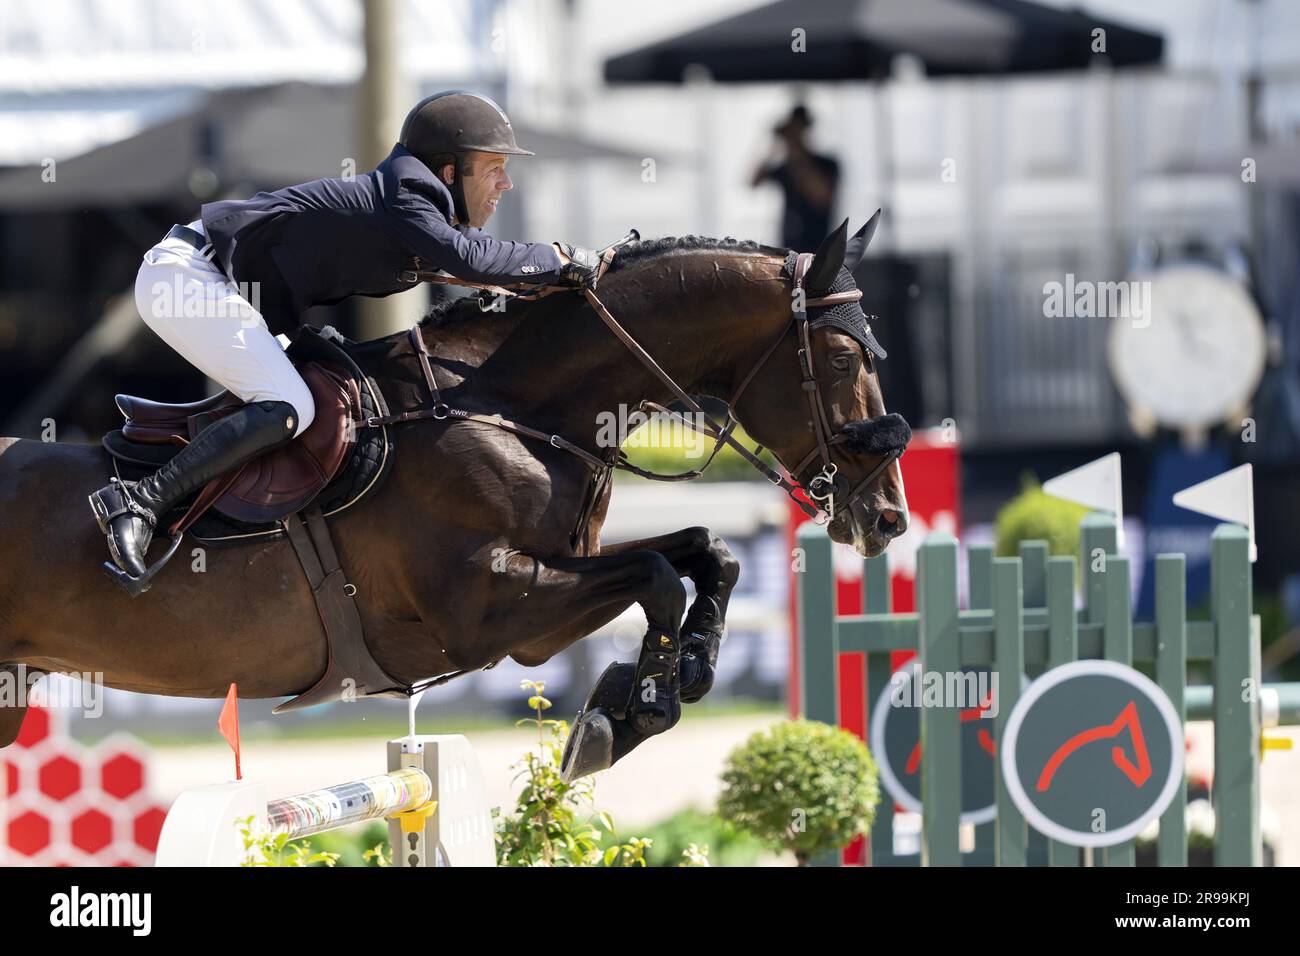 ROTTERDAM - Maikel van der Vleuten with O bailey vh Brouwershof in action during the Nations Cup jumping at CHIO Rotterdam. The equestrian event takes place for the 74th time in the Kralingse Bos in Rotterdam. ANP SANDER KONING netherlands out - belgium out Stock Photo